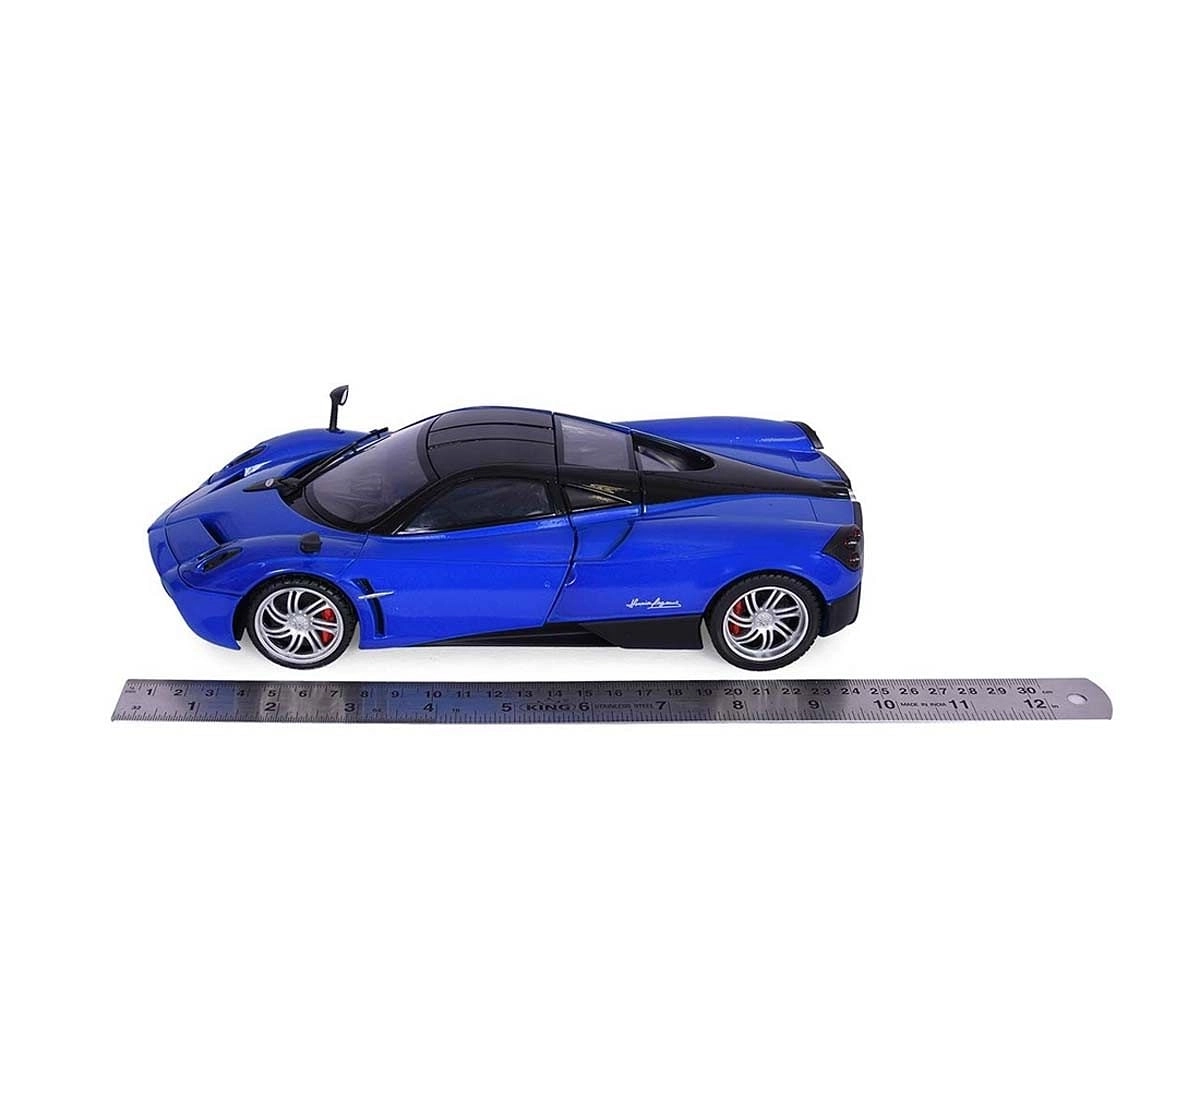 Motormax 1:18 Pagani Huayra Diecast Car Mounted On a Plastic Stand with Name Lable Blue Vehicles for Kids age 6Y+ 